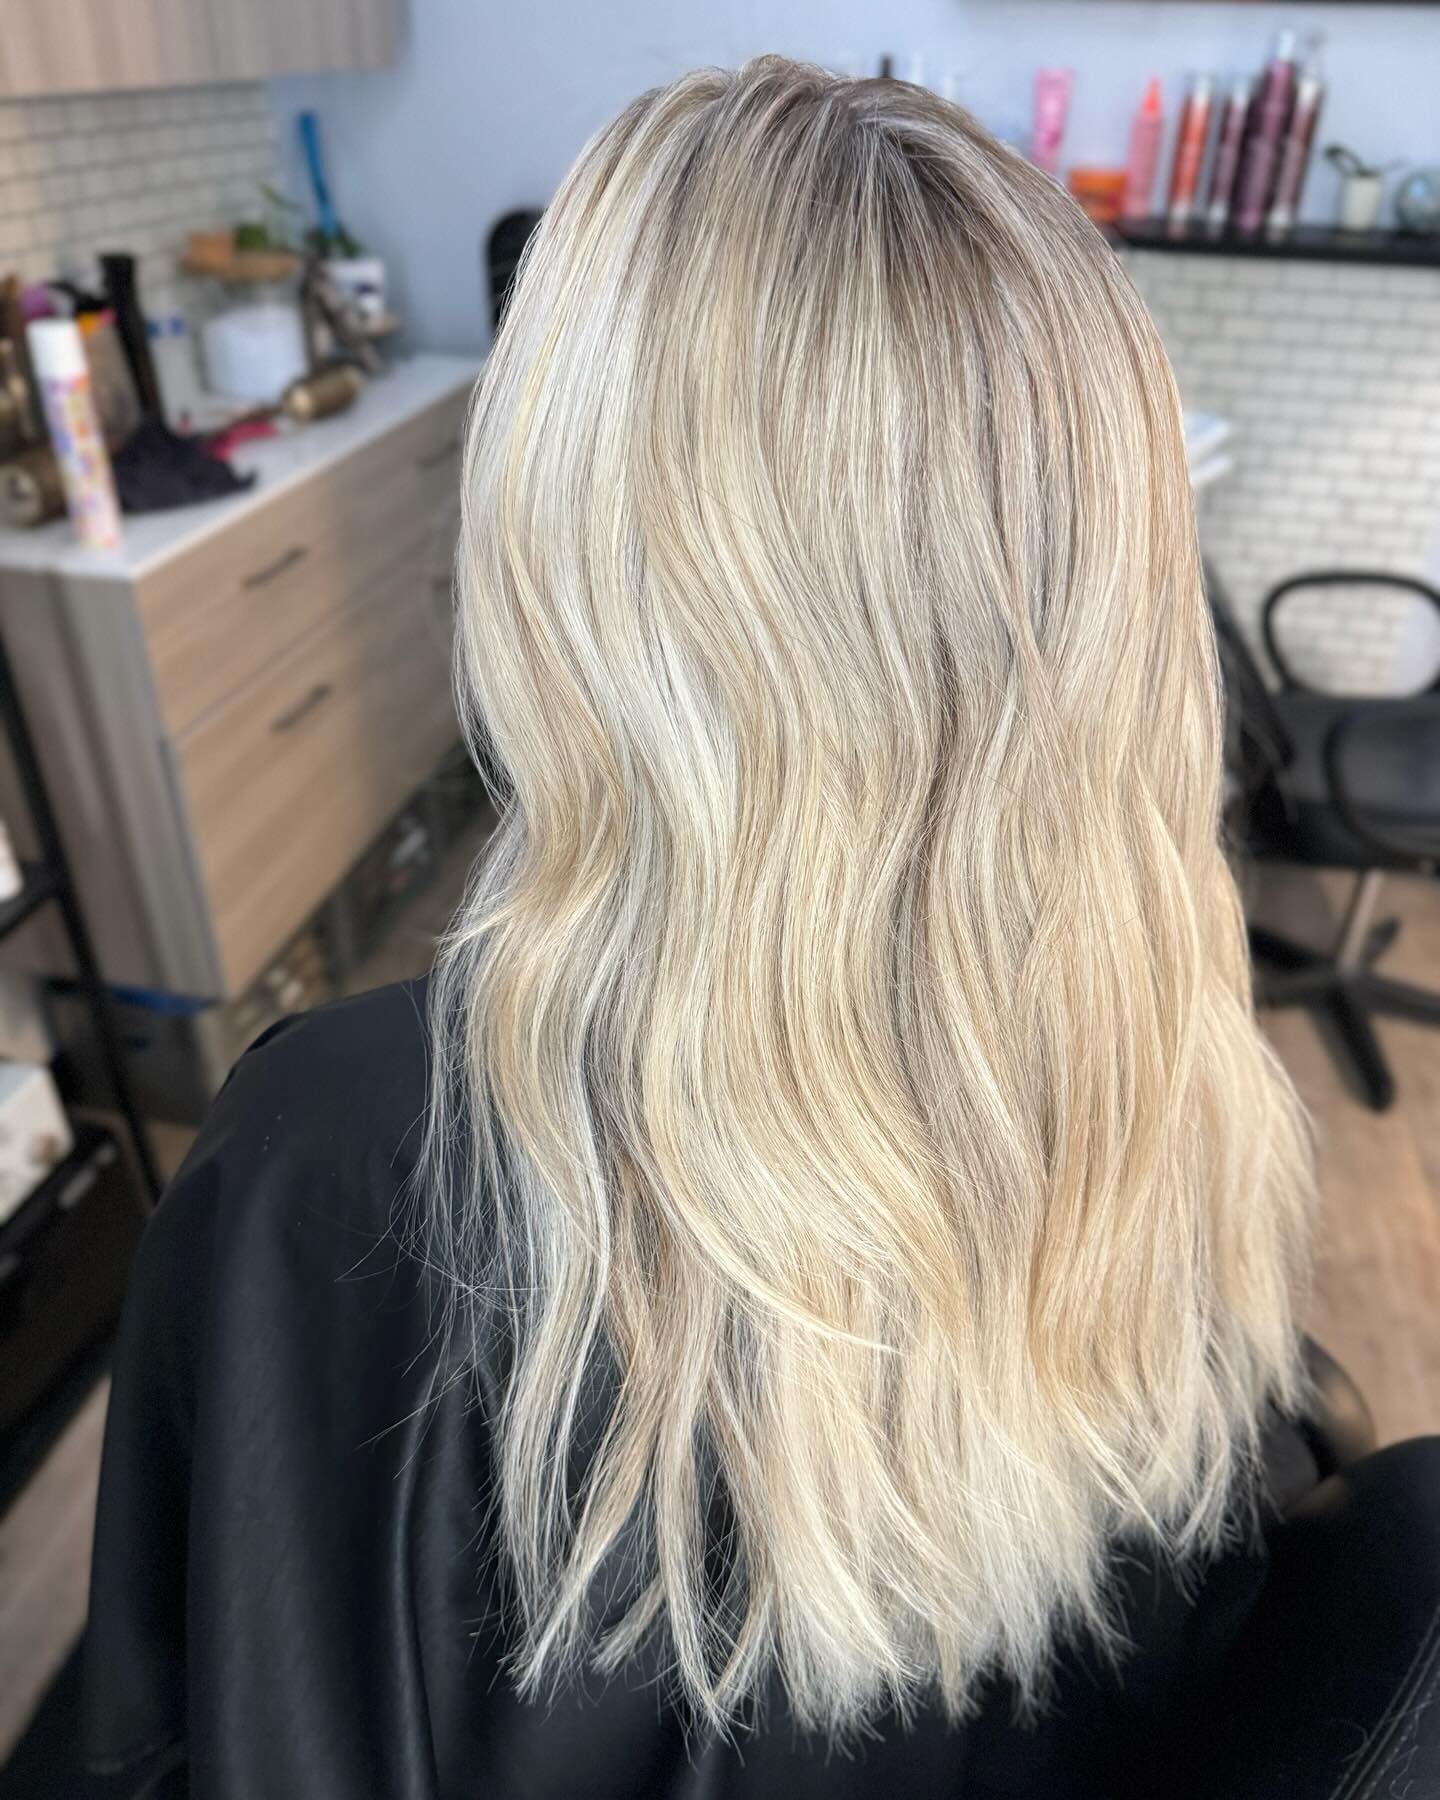 This BLONDE is ready for summer 🤍 @ljustice26 🤍

#blonde #blondehair #blondehighlights #blondebalayage #blondefoilayage #houstonblondes #htxblondes #houstonhairstylist #htxhairstylist #LOFT87 #aHAIRexperience